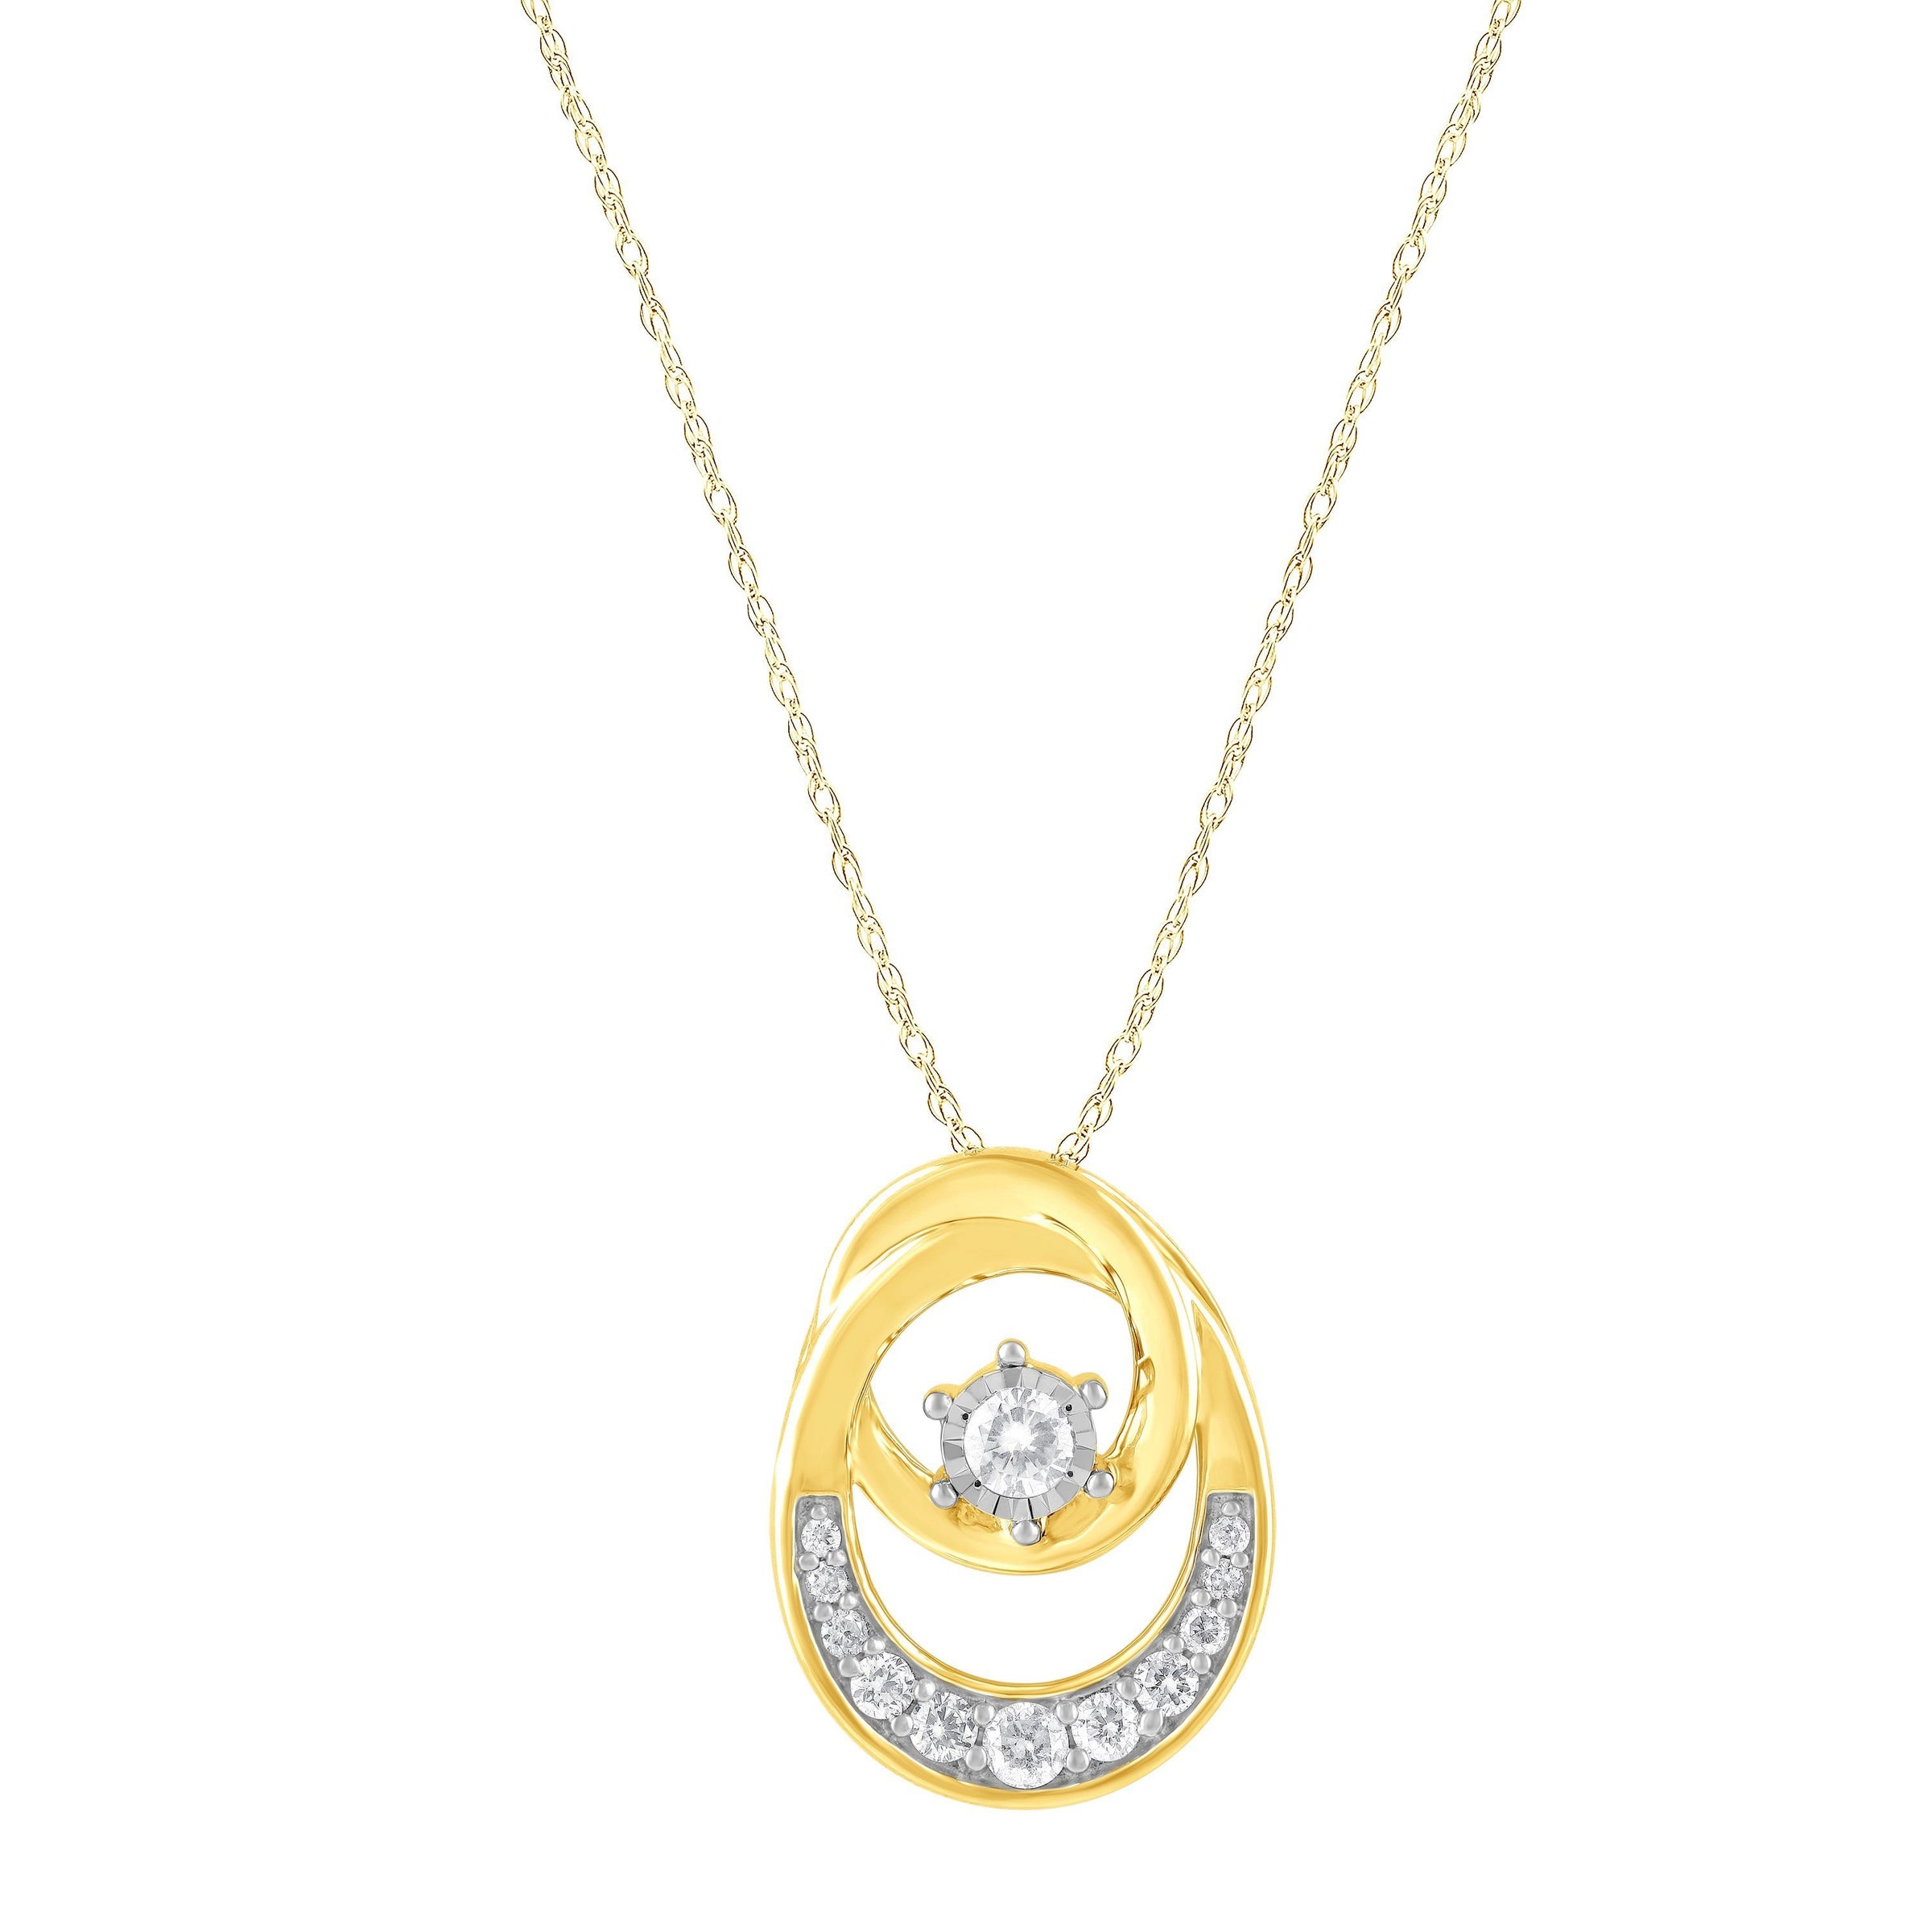 Feel Fabulous in 5 Double Open Circle Necklace with 1/4ct of Diamonds in 9ct Yellow Gold Necklaces Bevilles Jewellers 